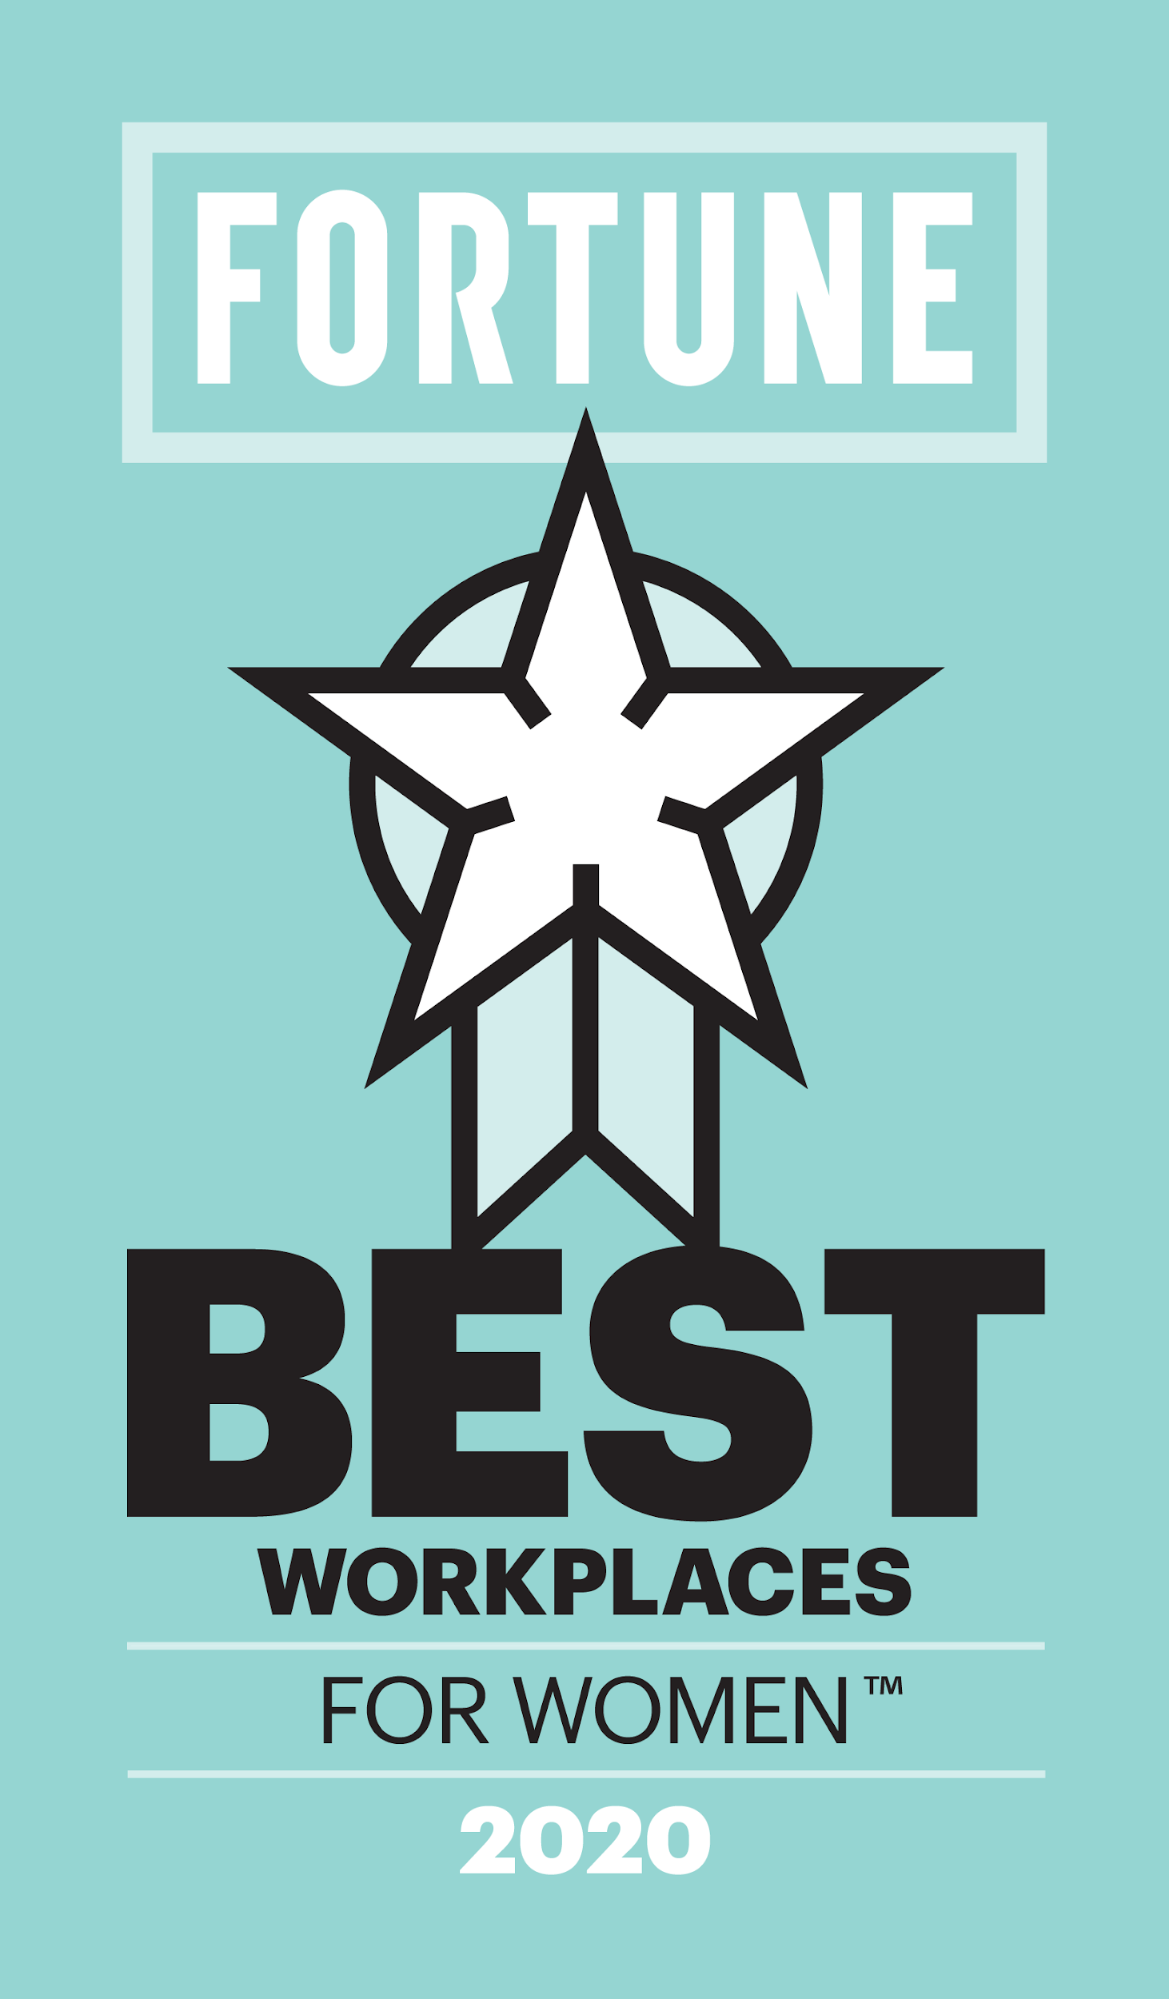 Fortune: Best Workplaces for Women 2020